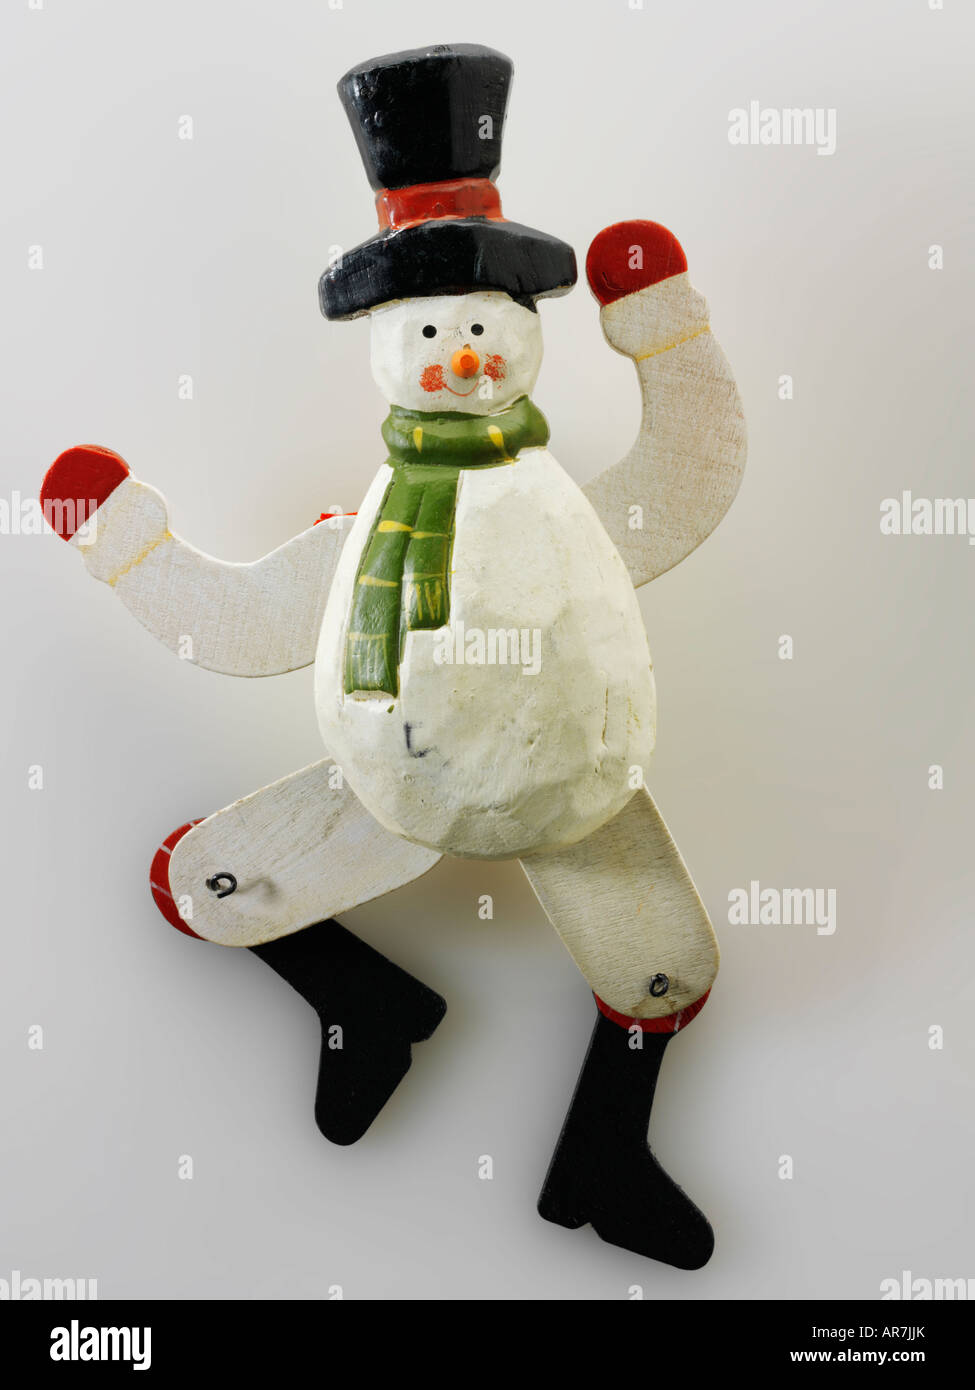 hand painted festive wooden snowman Christmas decoration Stock Photo